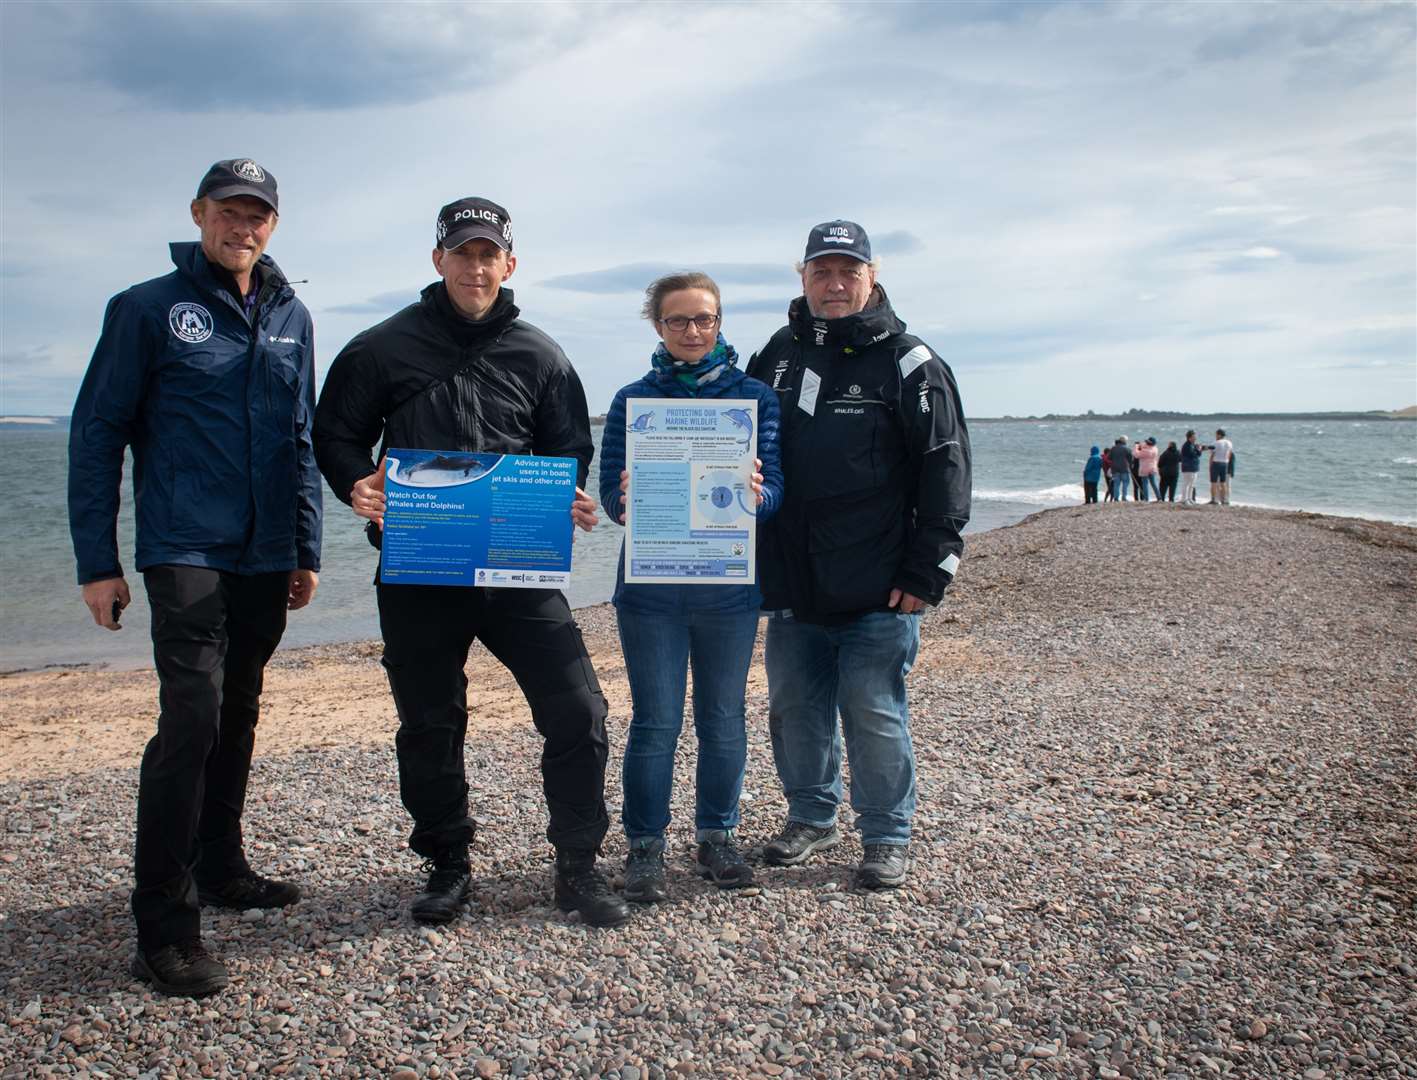 Kenneth Adam The Highland Council Ranger Service, Dan Sutherand Highland & Islands wildlife liaison officer, Sarah Macdonald-Taylor Community Councillor and Charlie Phillips Field officer for Whale & Dolphin Conservation. Picture: Callum Mackay.